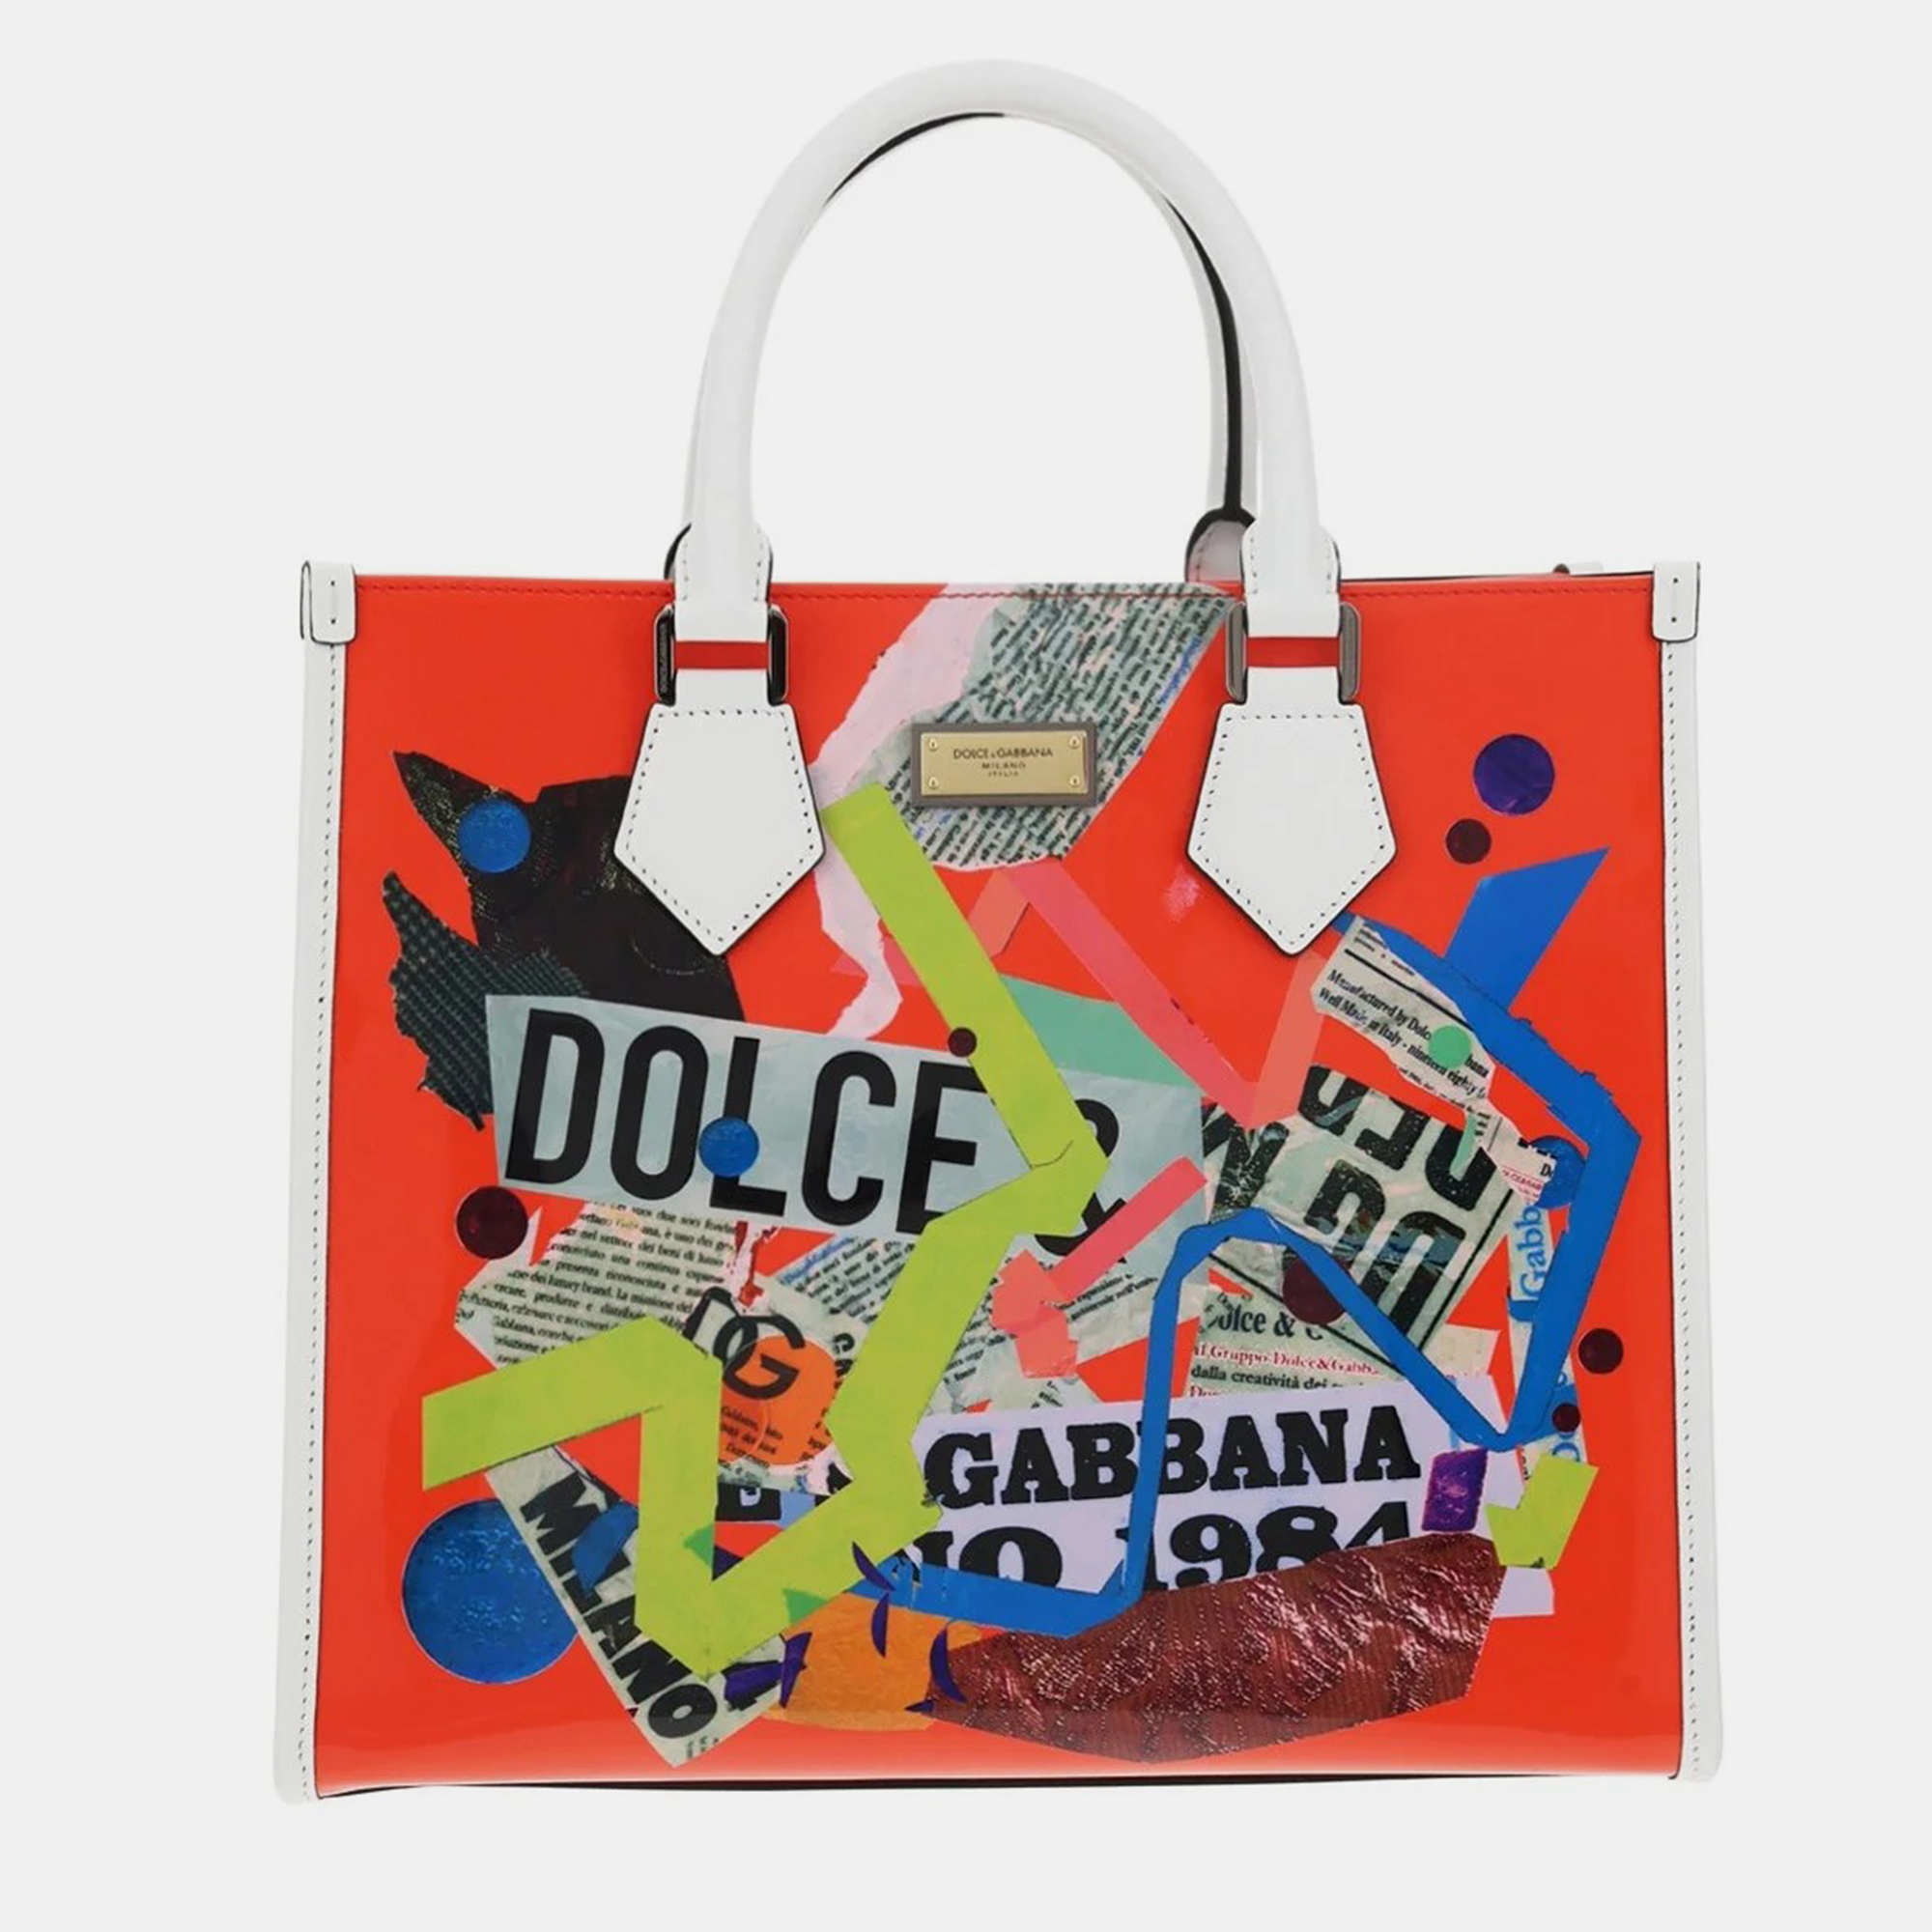 Dolce & Gabbana Red Multicolor  Leather  Tote Bag